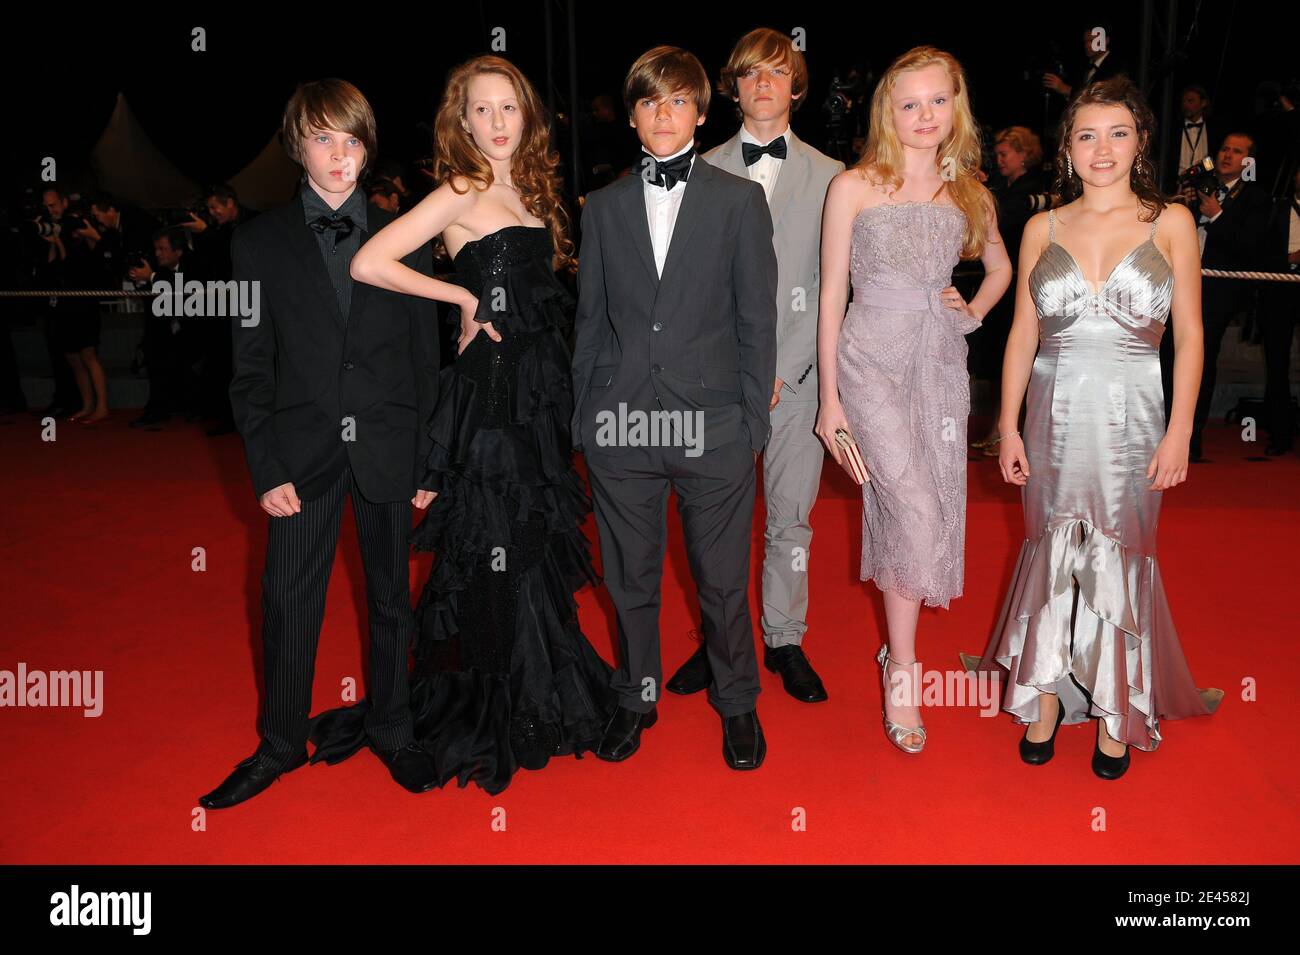 Leonie Benesch, Marie-Victoria Dragus, Janina Fautz, Roxanne Duran, Michal Kranz, Leonard Proxauf and Enno Trebbs arriving for the screening of 'The White Ribbon' during the 62nd Cannes Film Festival at the Palais des Festivals in Cannes, France on May 21, 2009. Photo by Nebinger-Orban/ABACAPRESS.COM Stock Photo